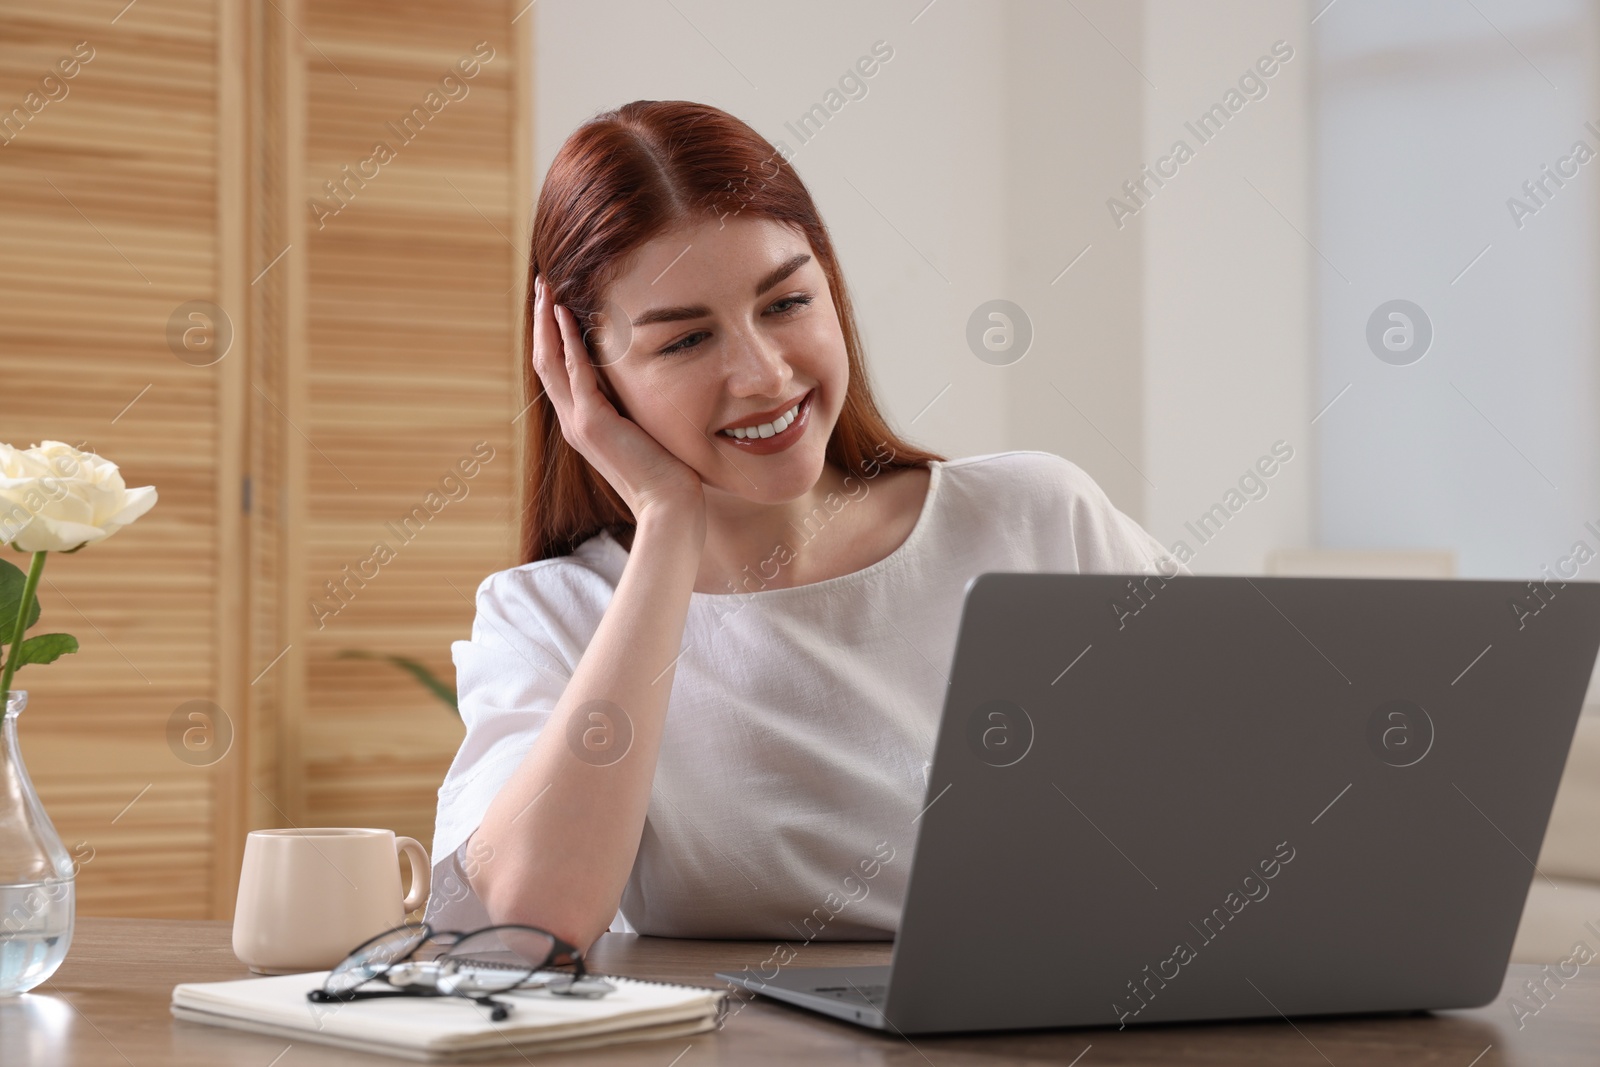 Photo of Happy woman using laptop at wooden table in room